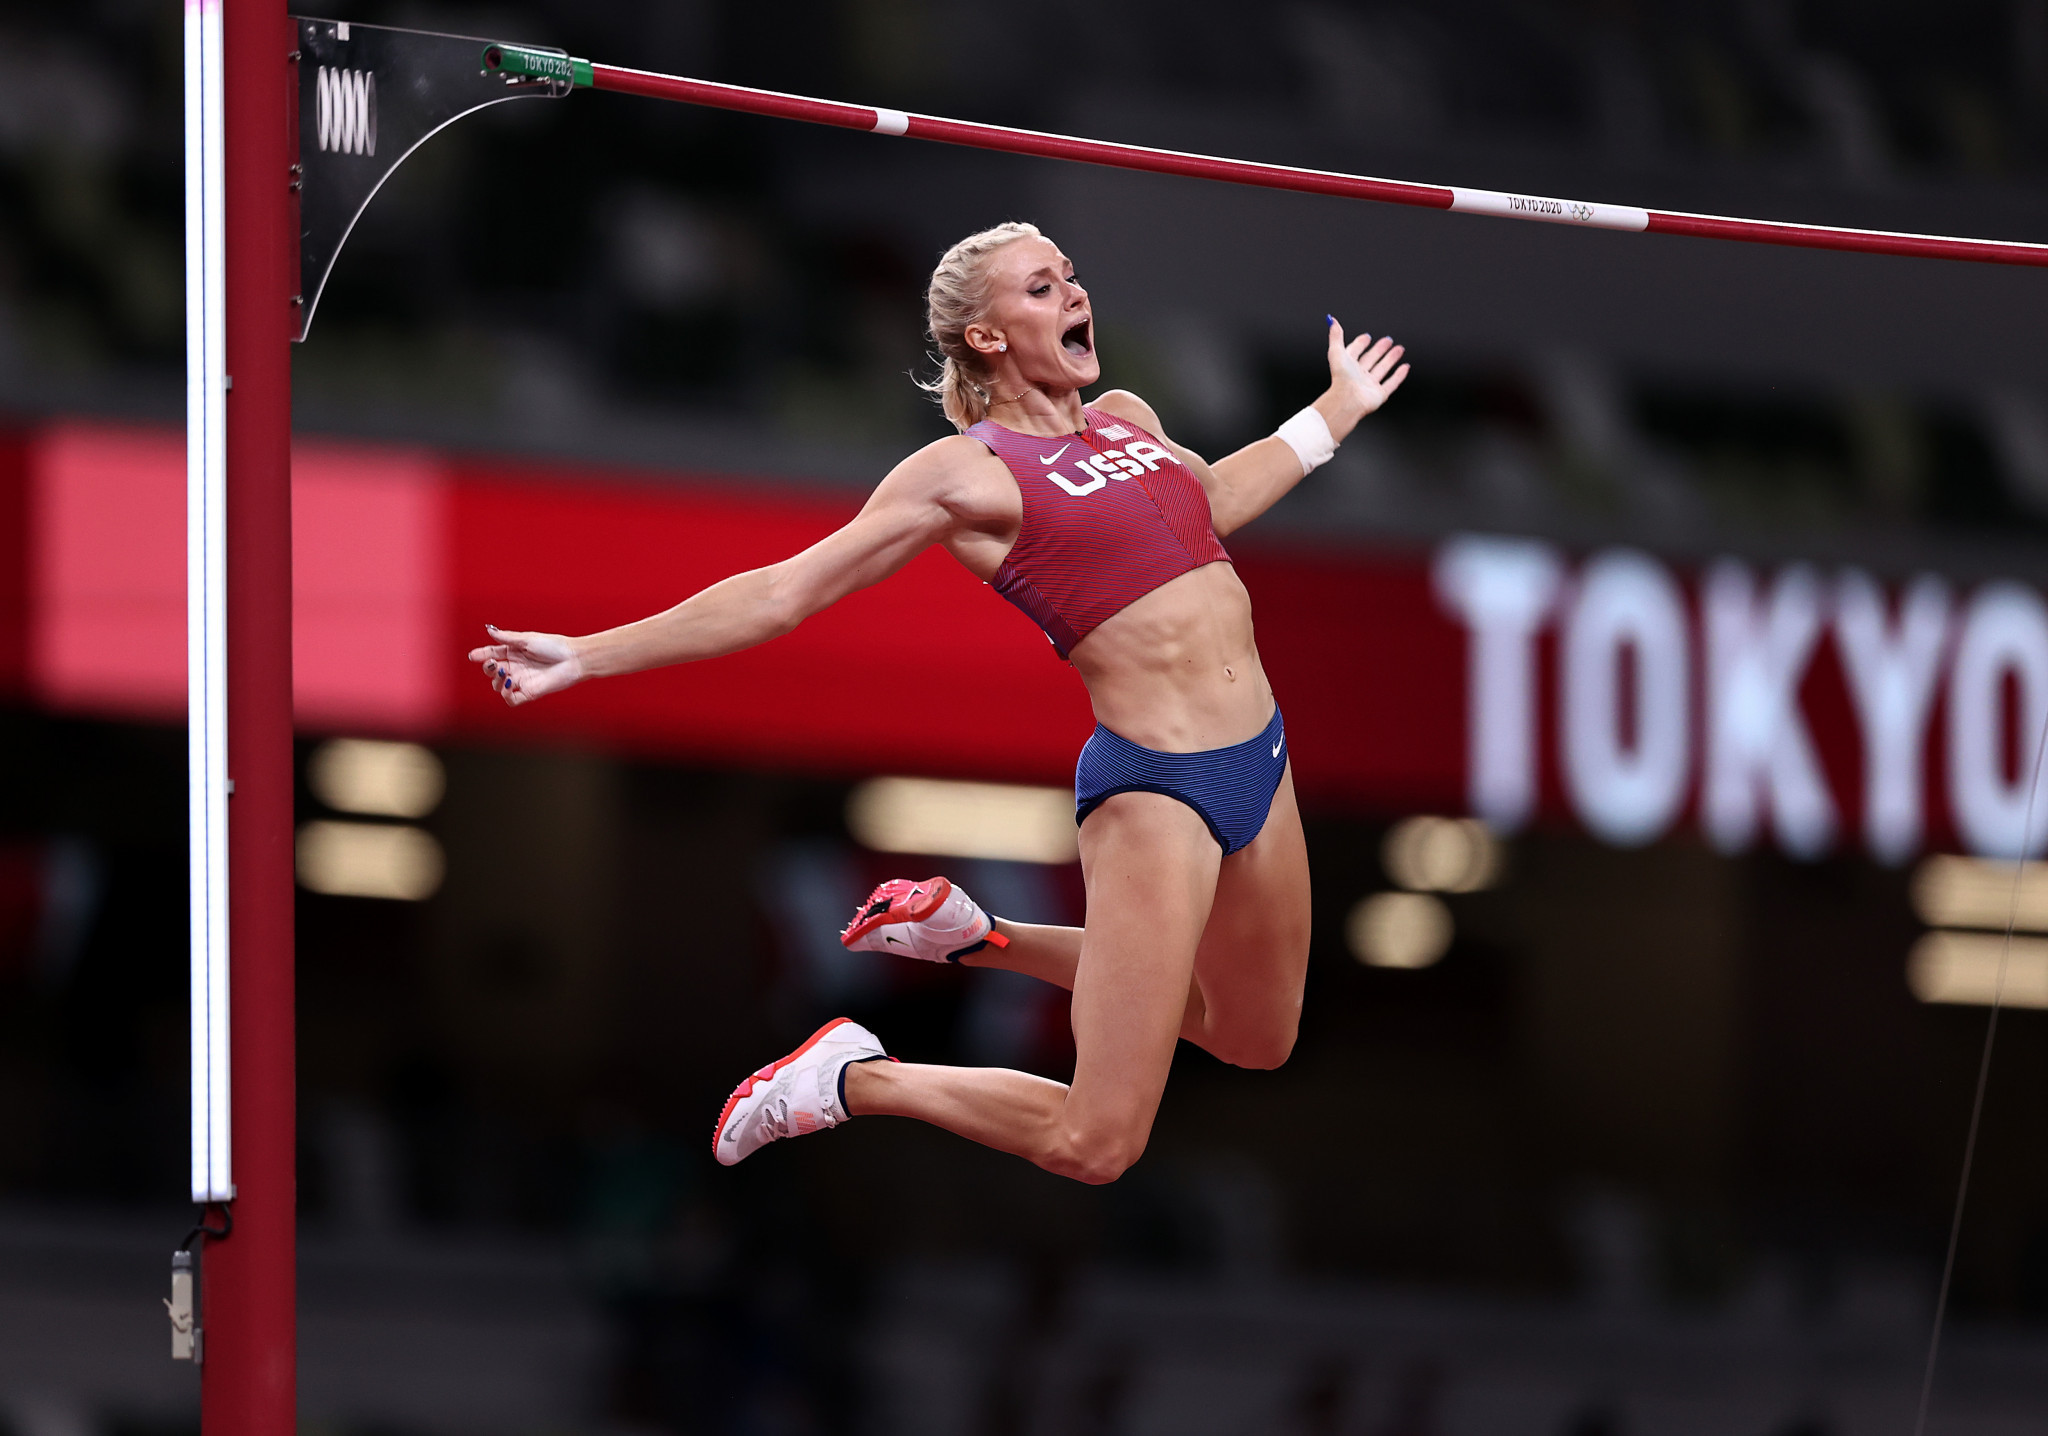 Nageotte earns dramatic pole vault gold as Thiam and Warner win heptathlon and decathlon